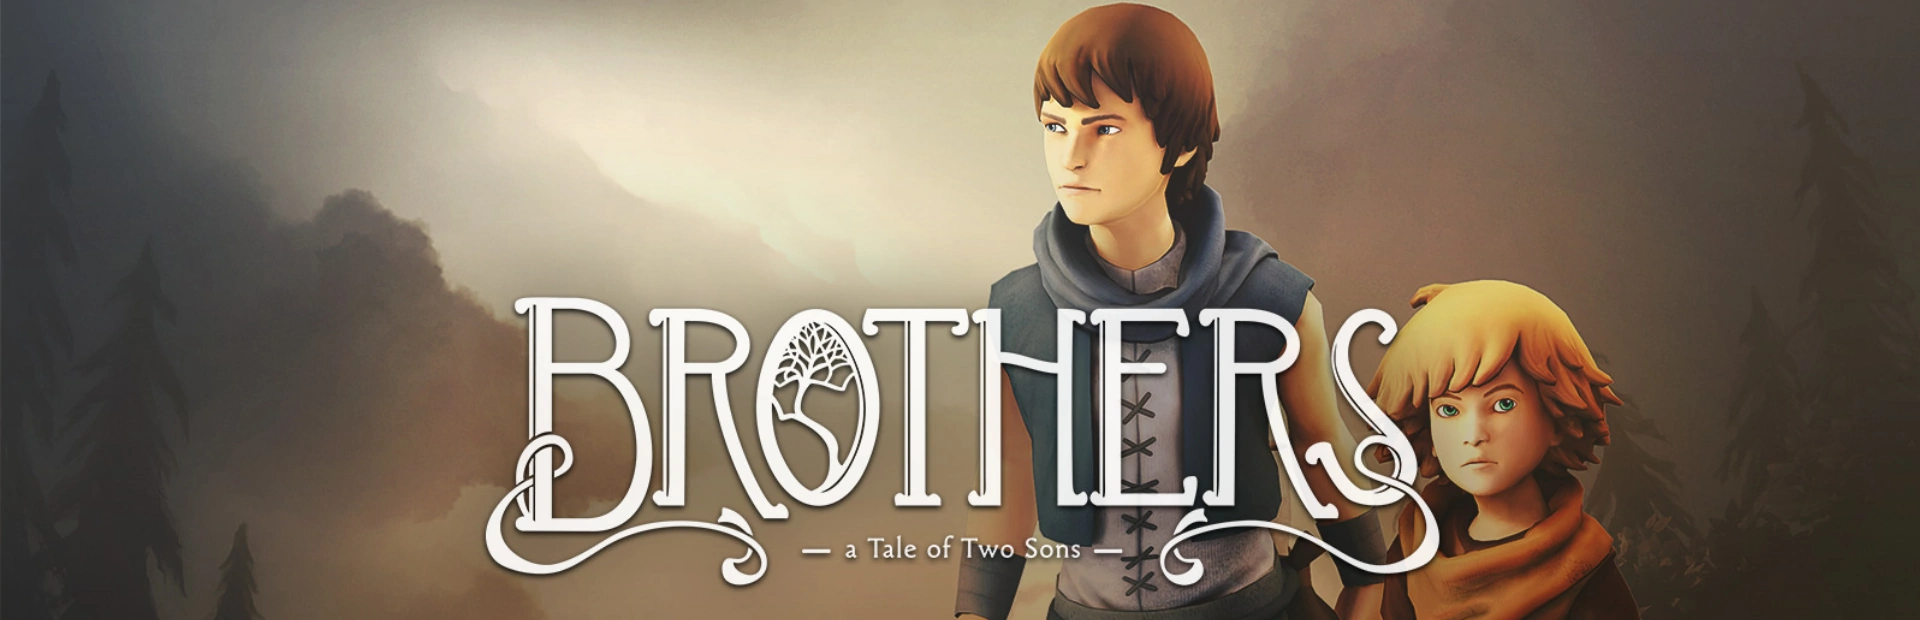 Brothers.A.Tale .of .Two .Sons .banner1